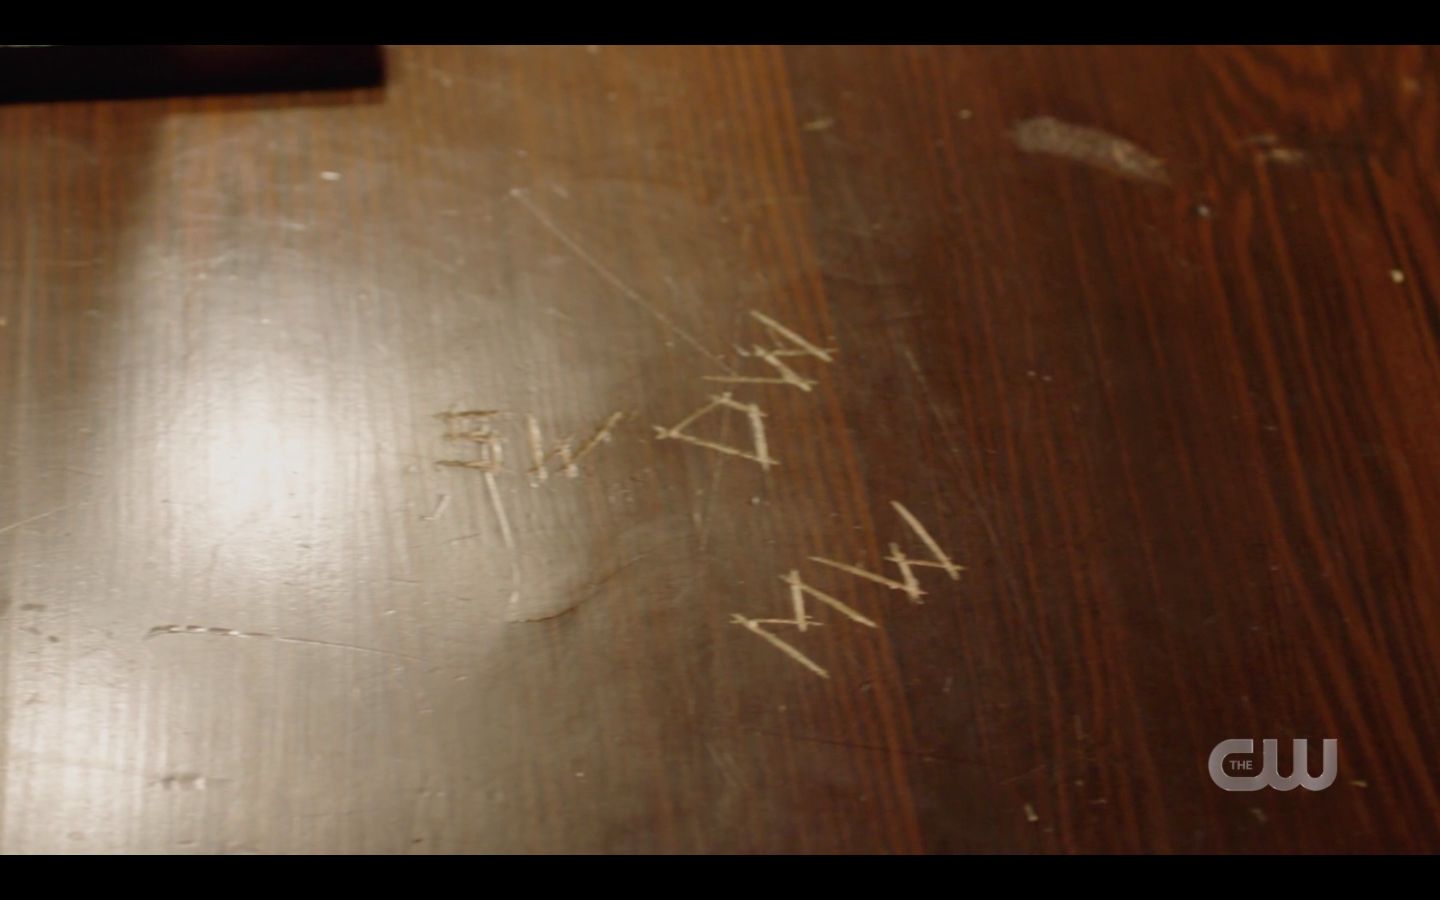 Table where Sam Dean Winchester carved their initals now with Mary Winchester initials 14.18 SPN